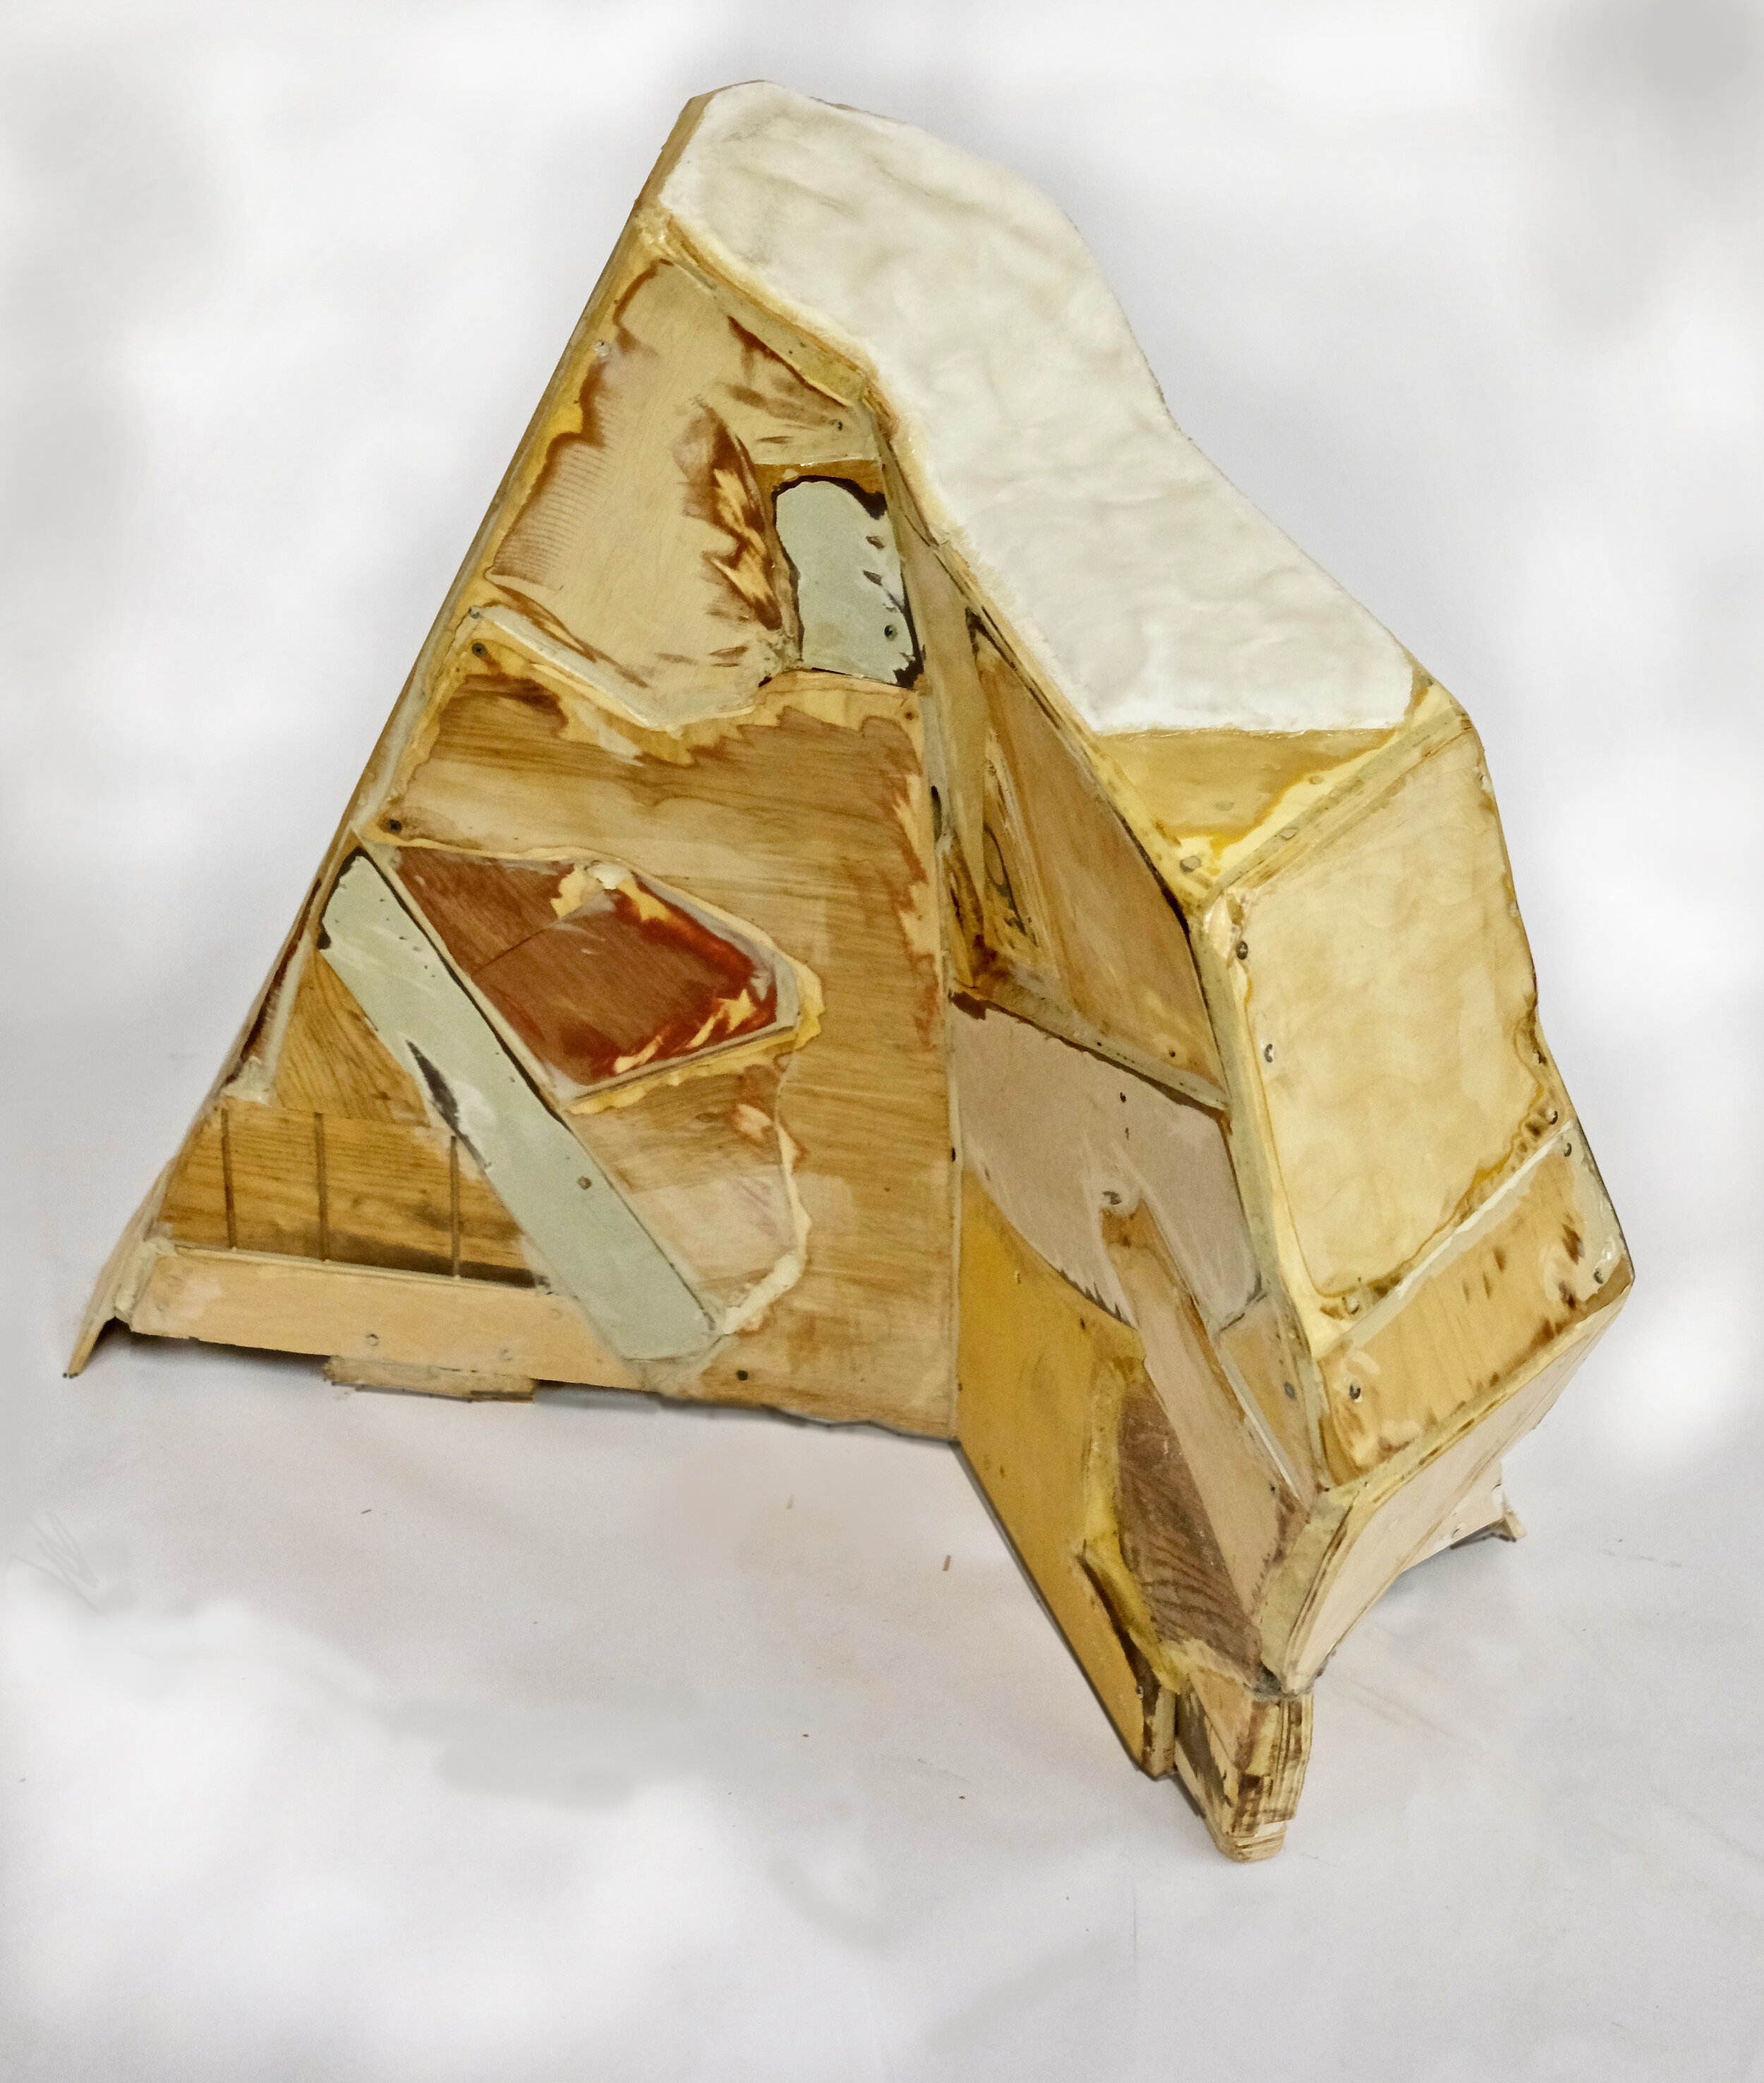 SHARD # 2 I 32 x 28 x 40 in / 81.28 x 71.12 x 101.6cm, materials salvaged from recently closed Chicago public schools, 2020